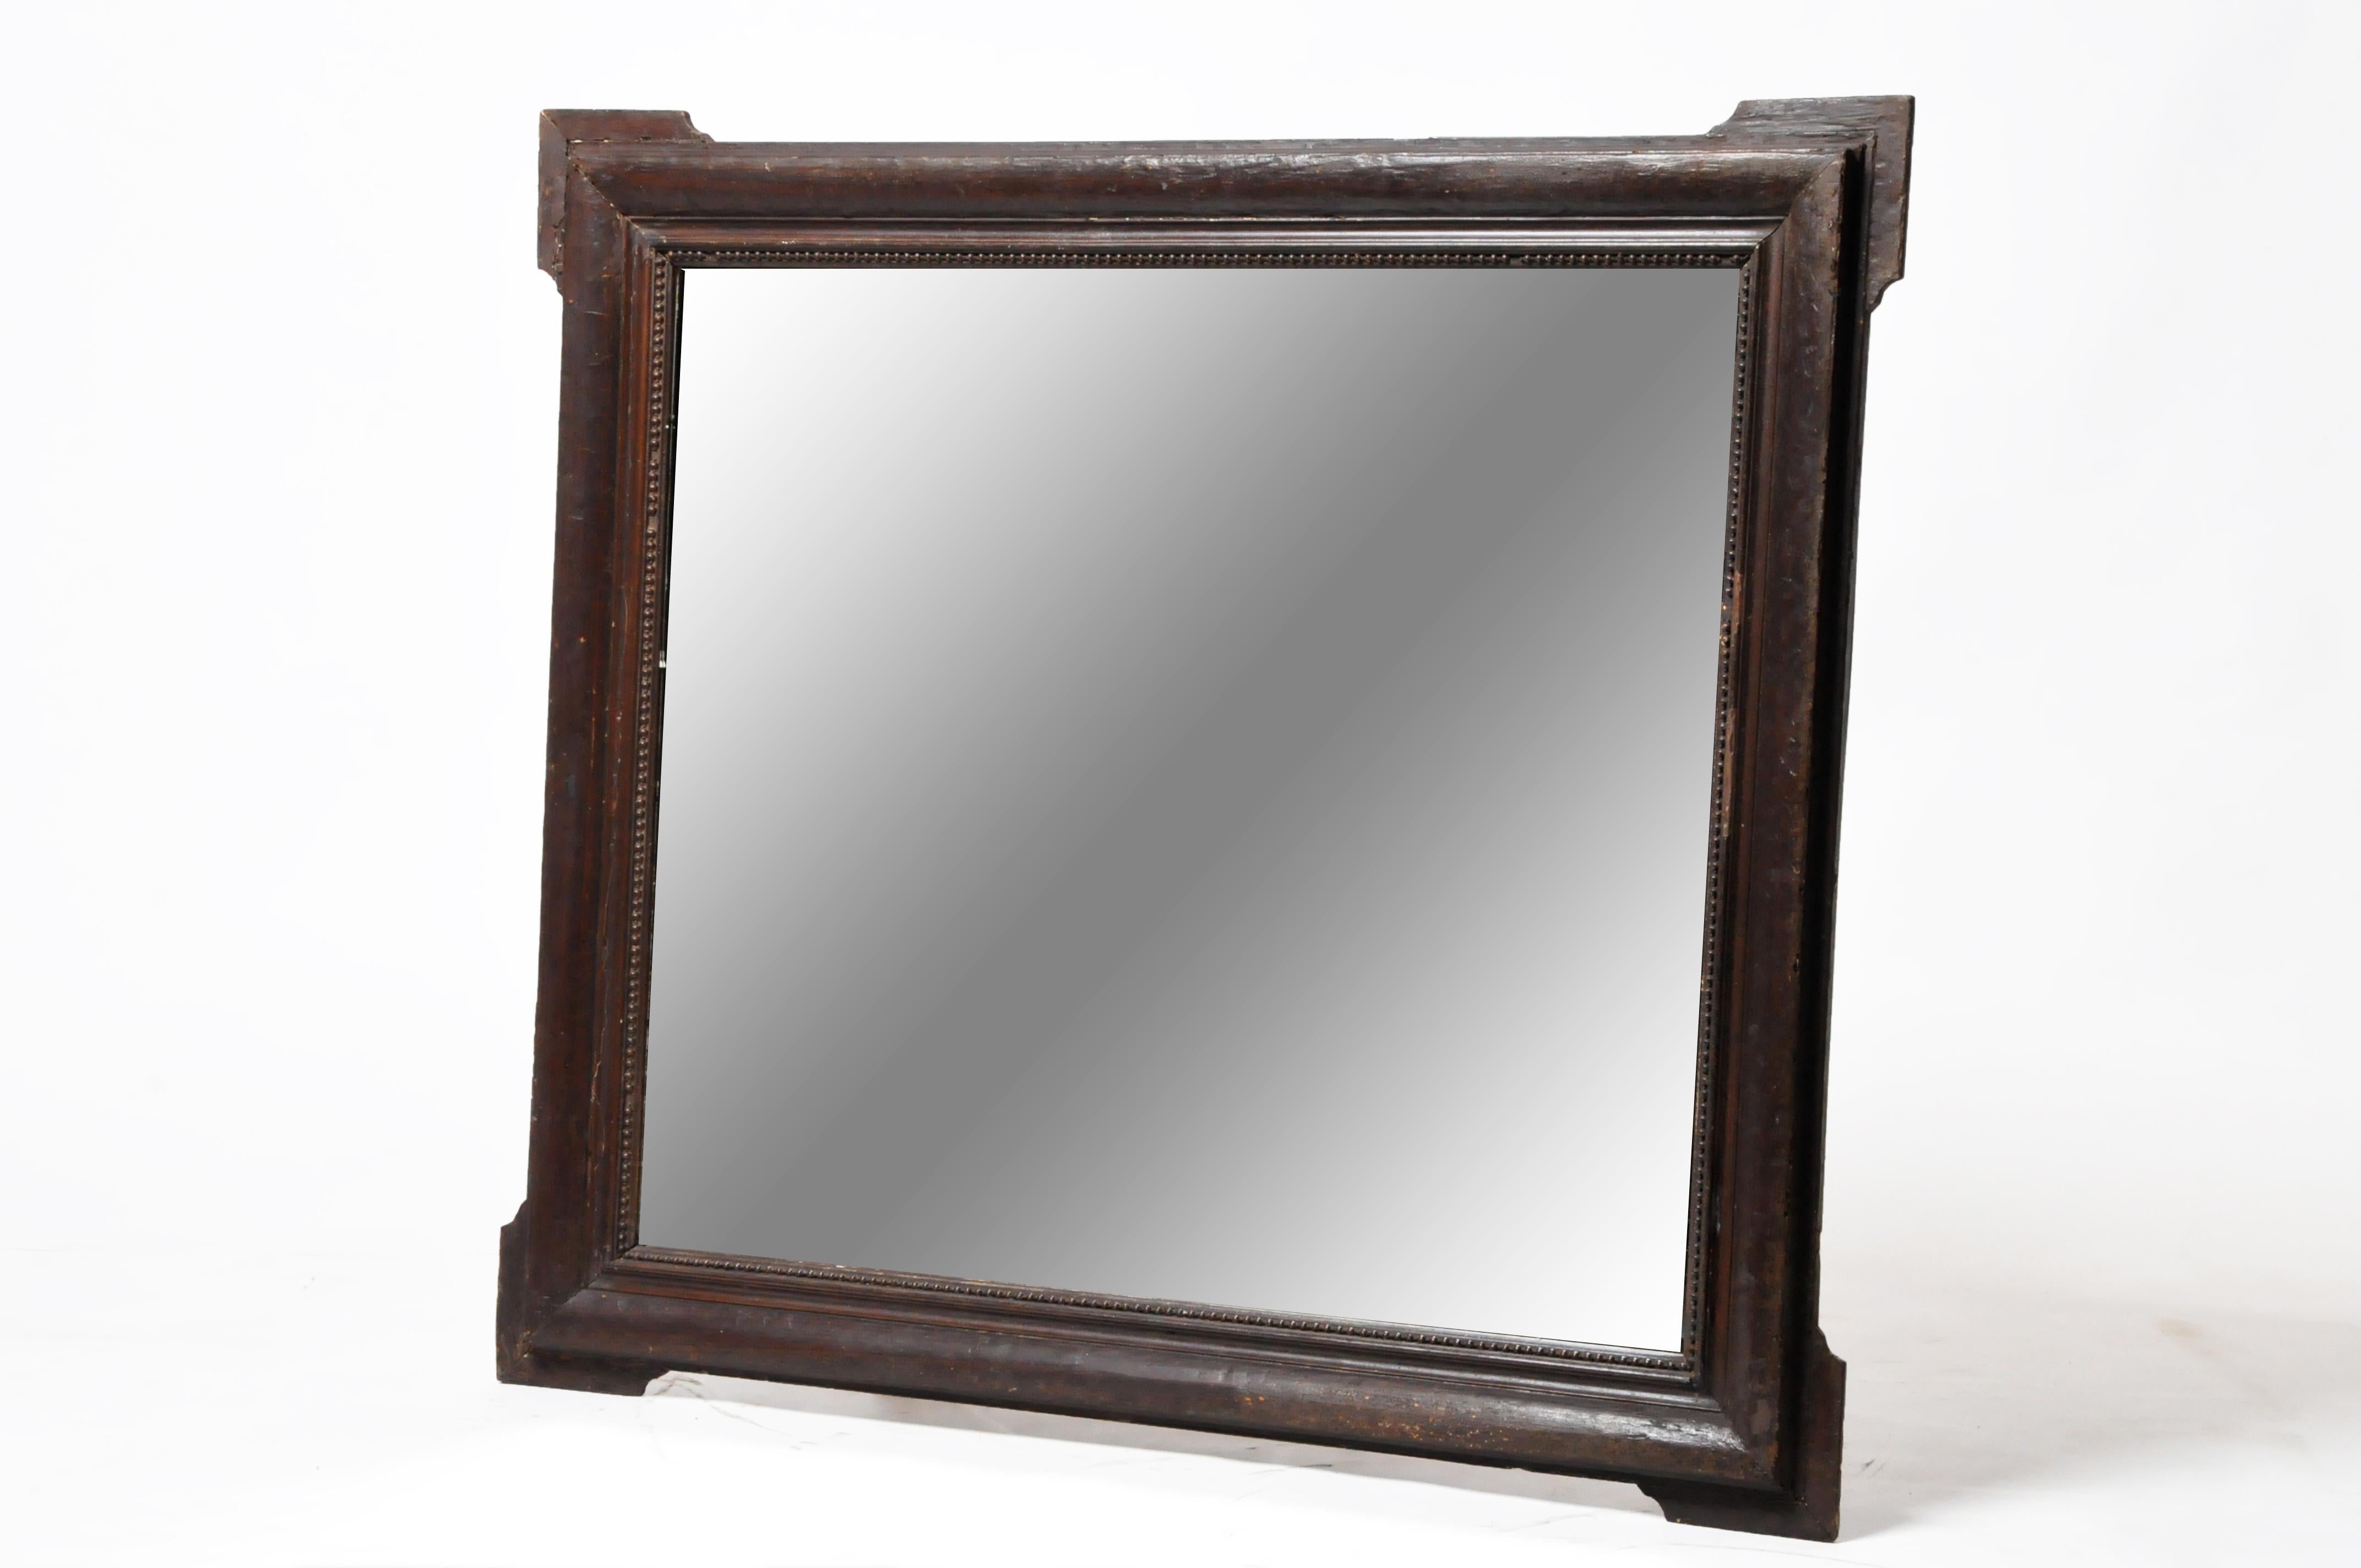 This unusually simple, heavy wooden frame was made in France according to the Dutch style. Dutch (or Flemish) design reached a peak in the 17th Century and favored simple shapes and the color black. This is partly due to the primacy of protestant